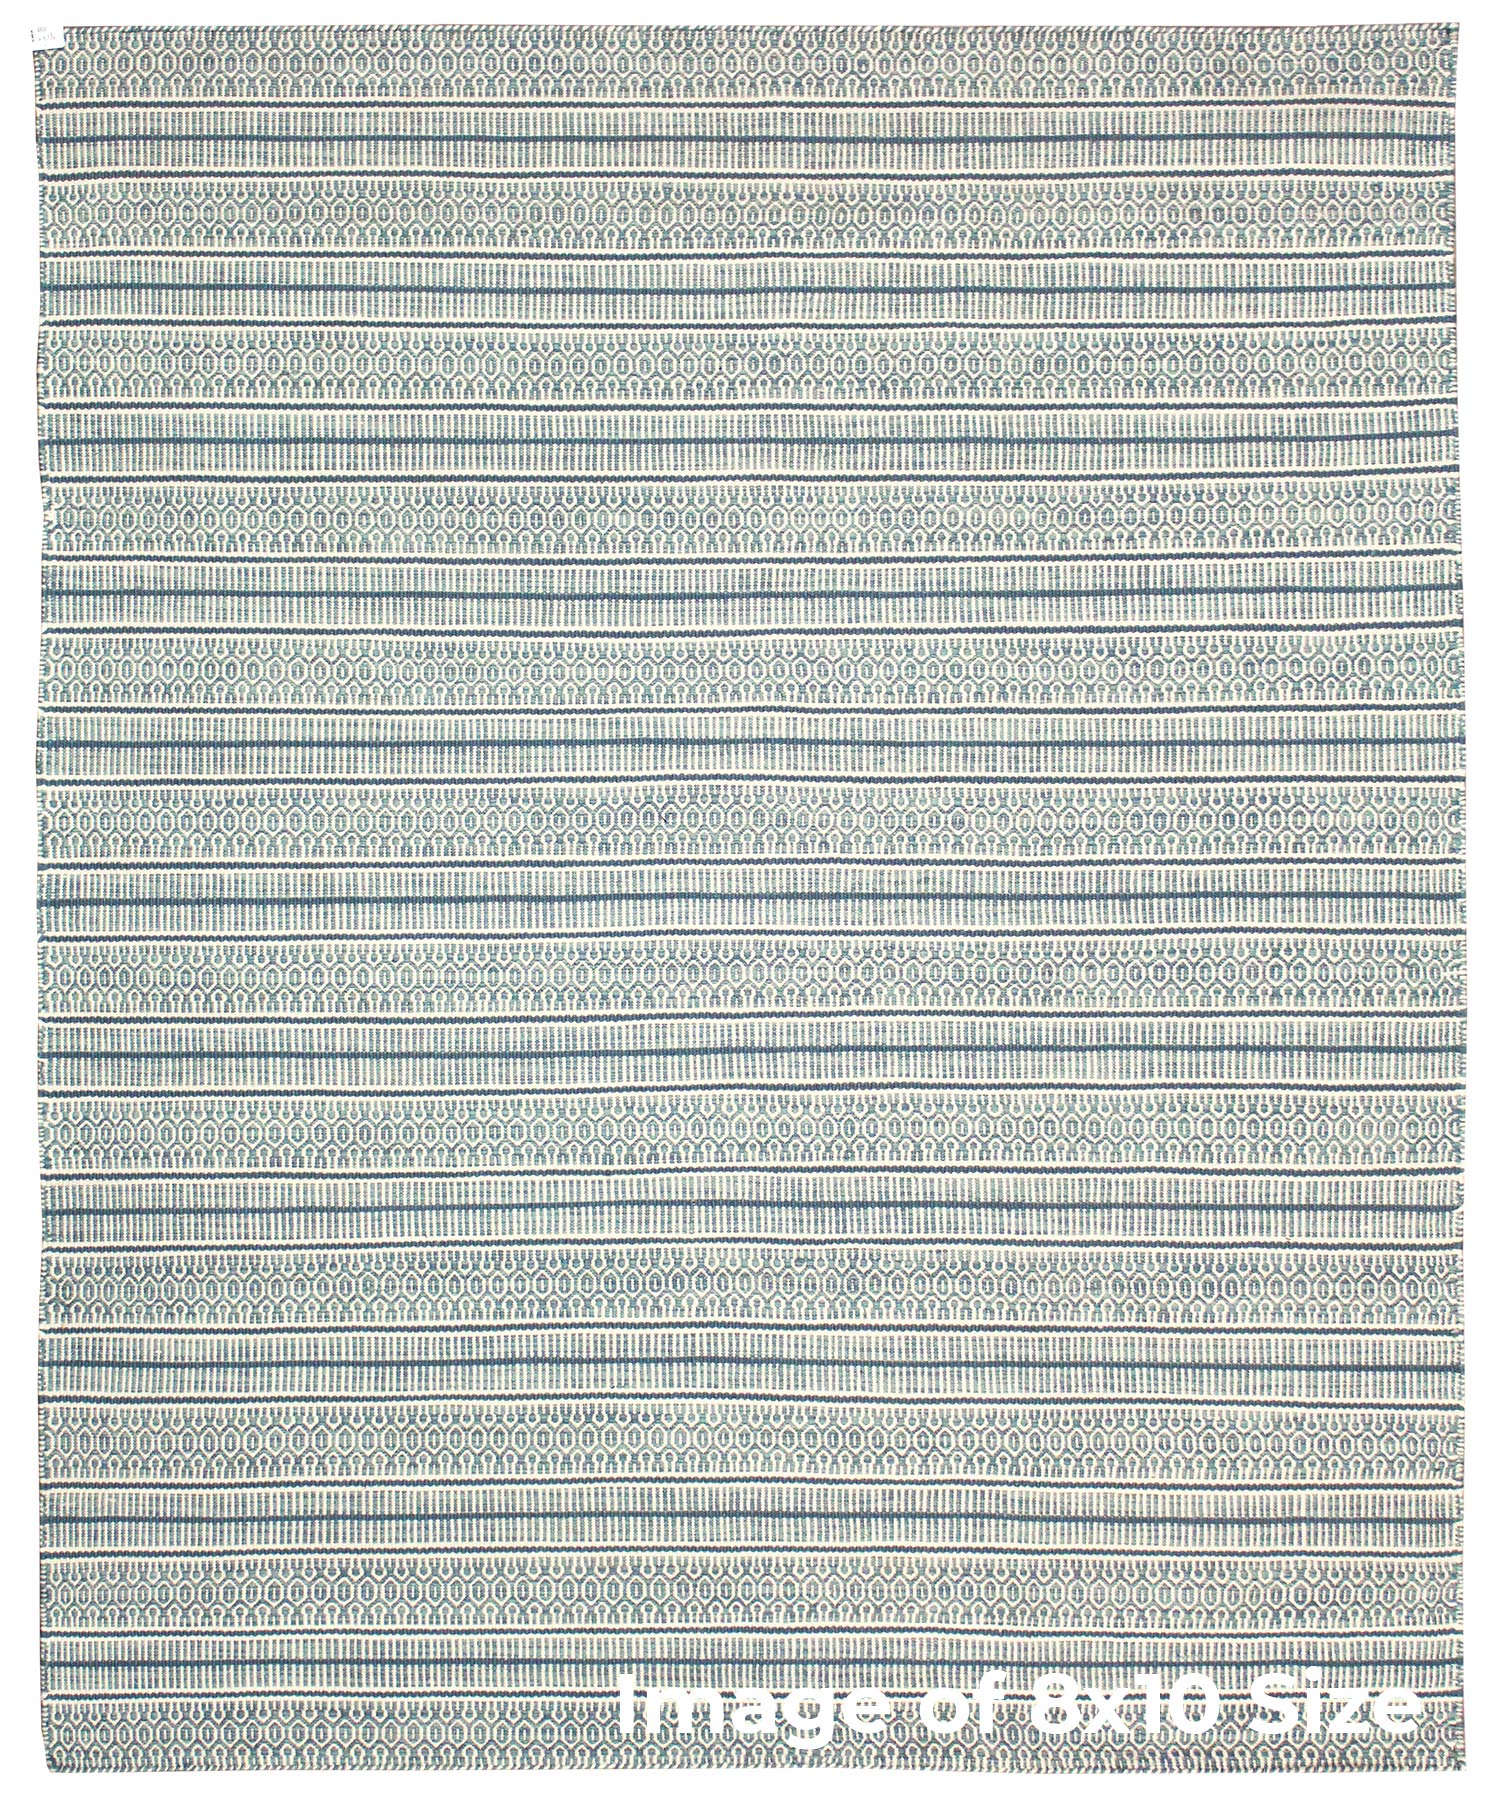 Acadia Semi Worsted Handwoven Contemporary Rug